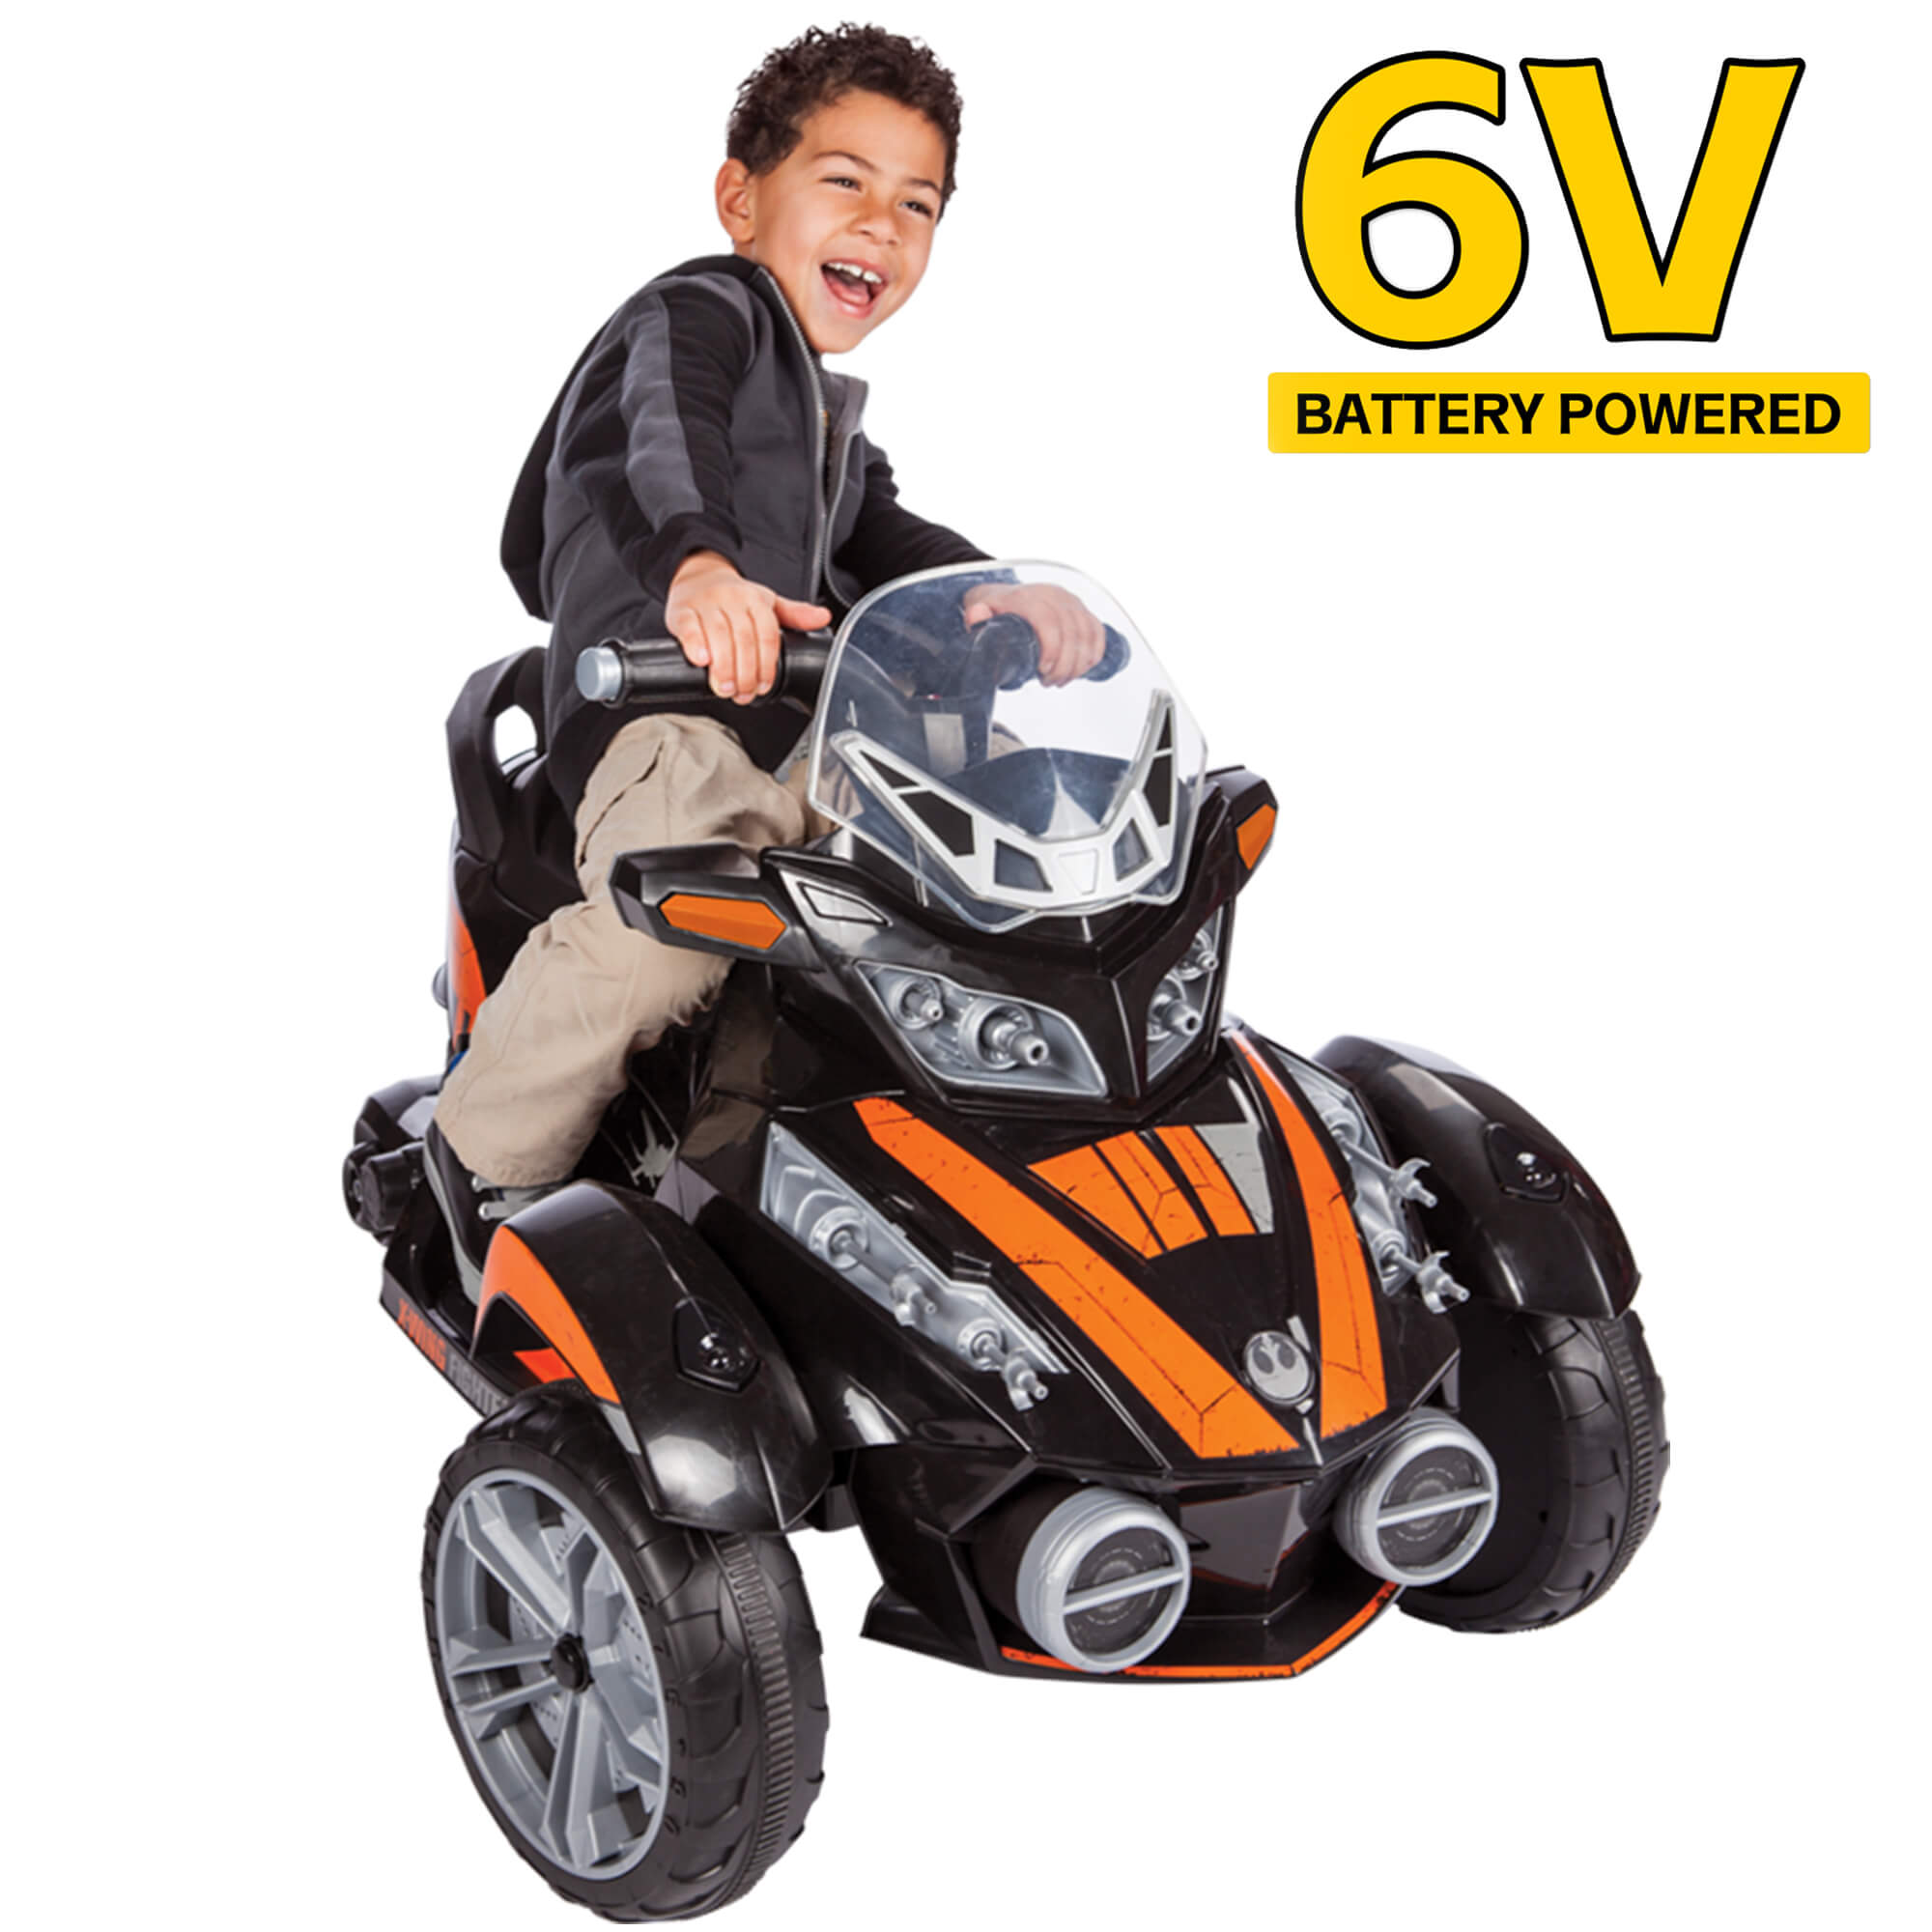 Star Wars X Wing 6V Battery-Powered Electric Ride-On Toy by Huffy - image 1 of 9